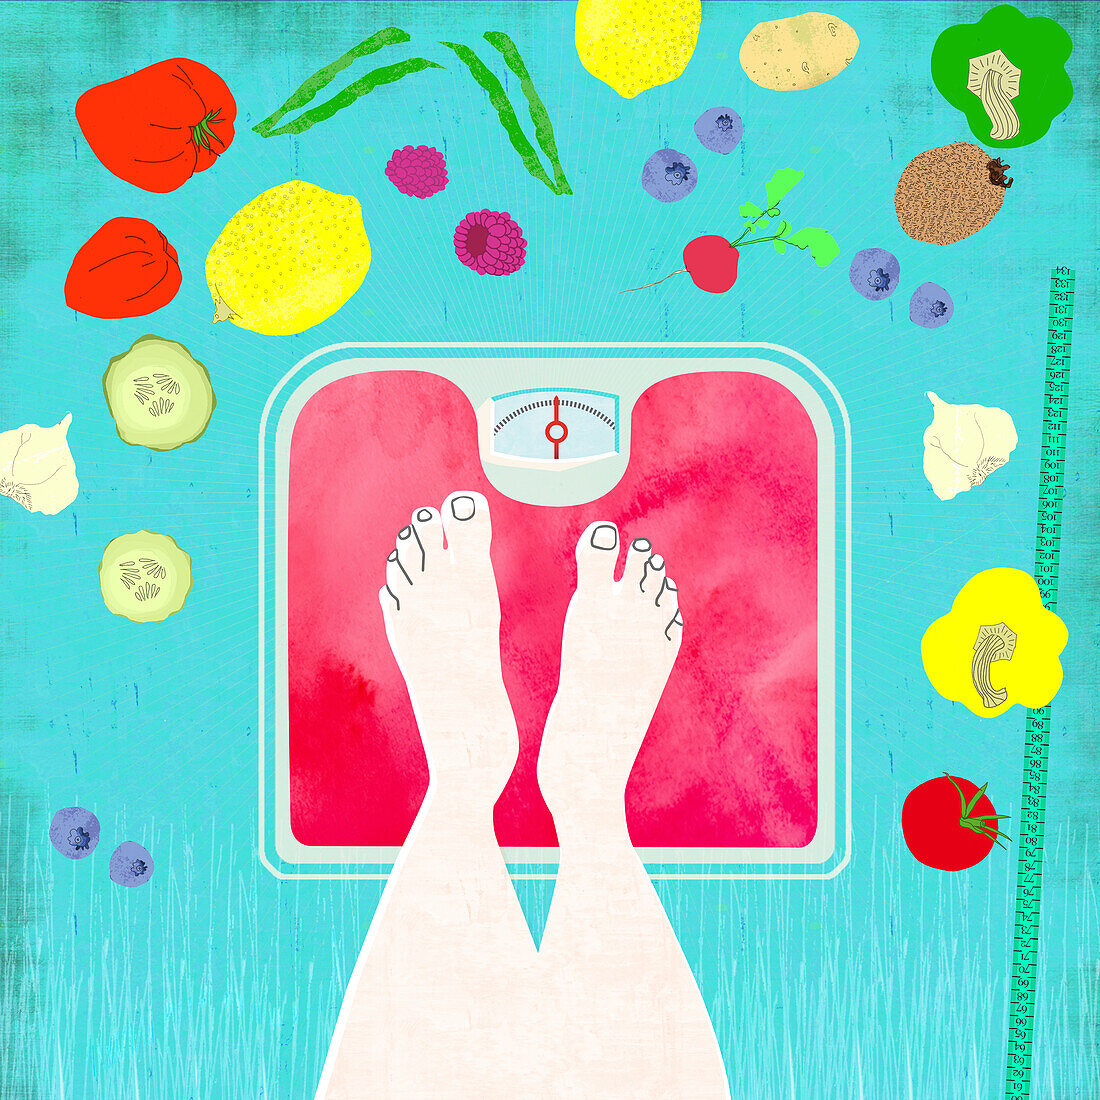 Feet on scales with a healthy diet, illustration